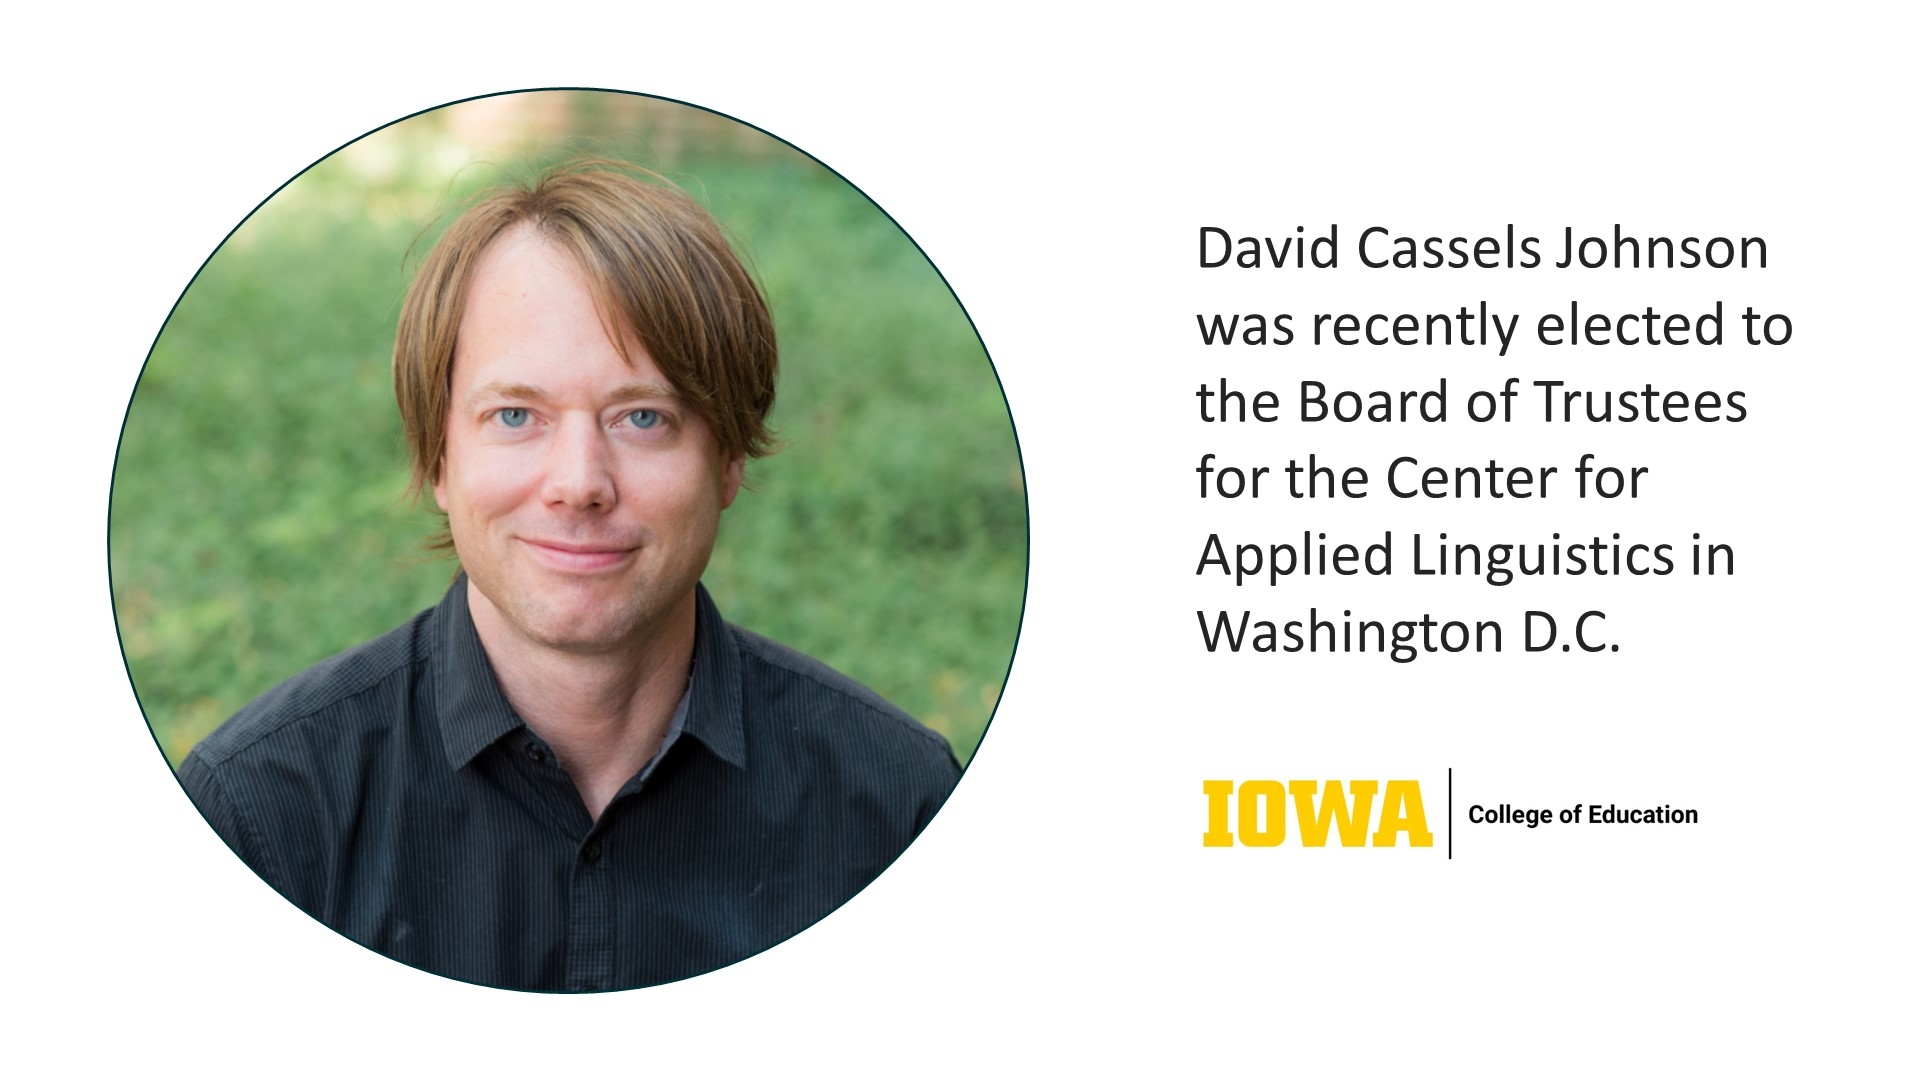 David Cassels Johnson was recently elected to the Board of Trustees for the Center for Applied Linguistics in Washington D.C.